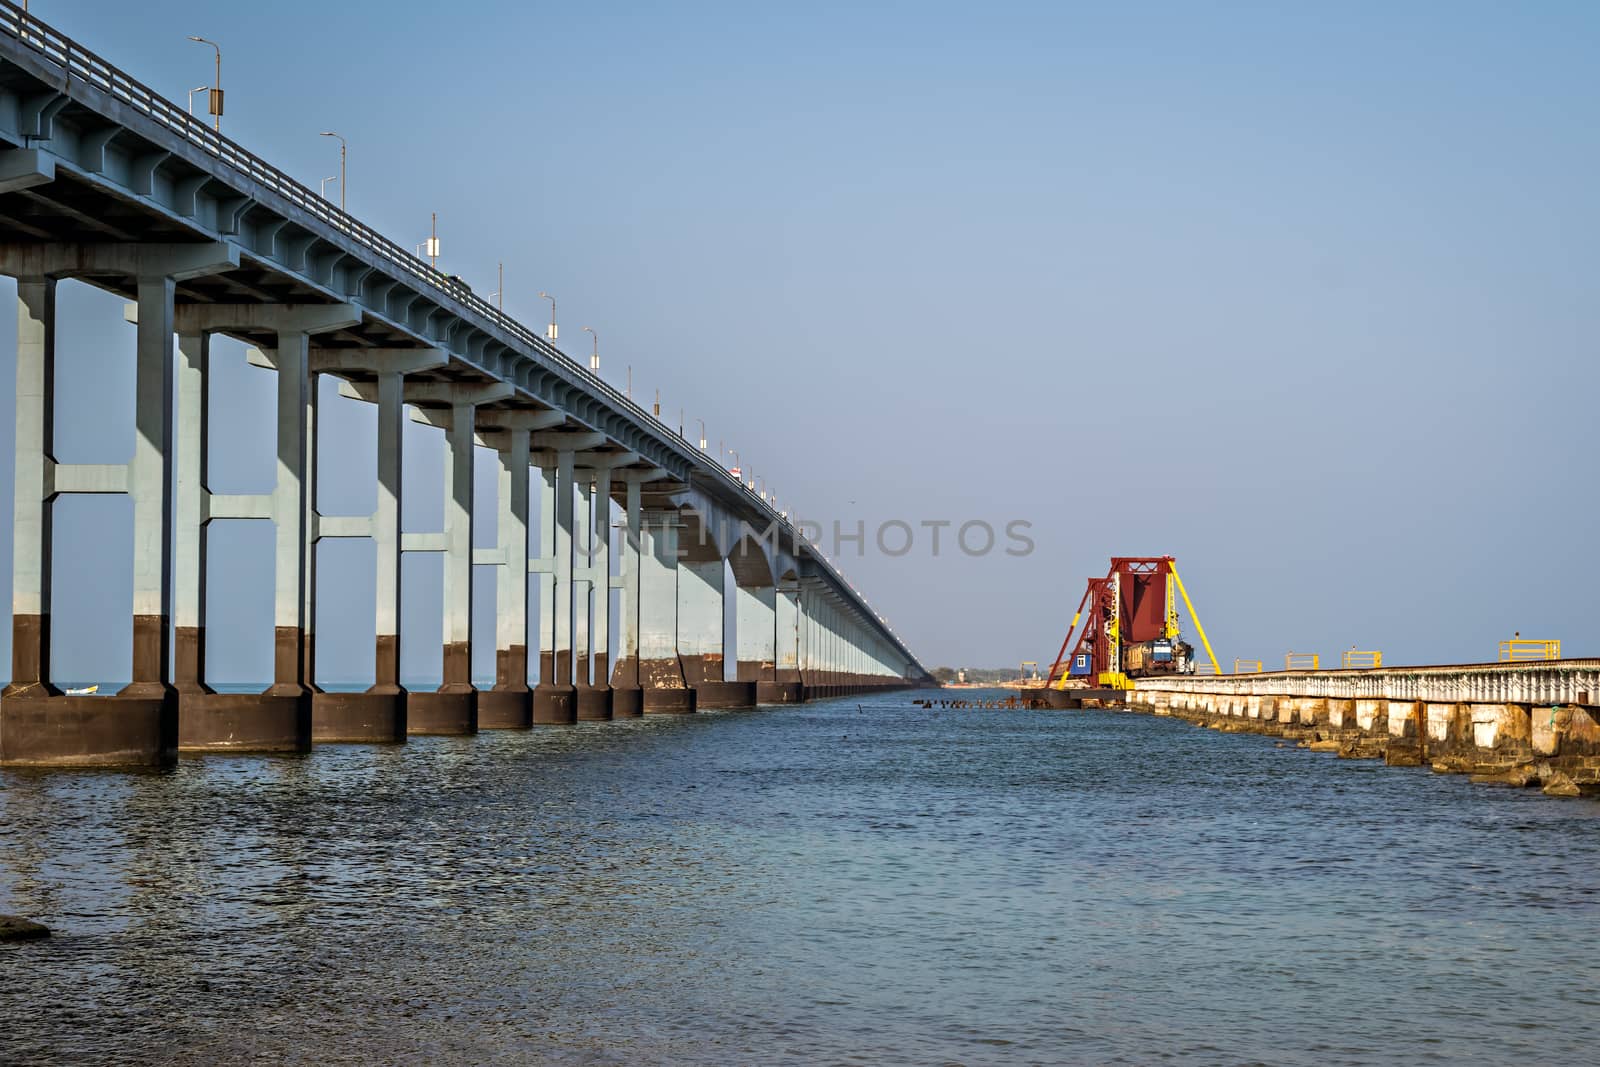 More than 100 years old India's first sea bridge for railway and a tall road bridge connecting Pamban island to mainland India.